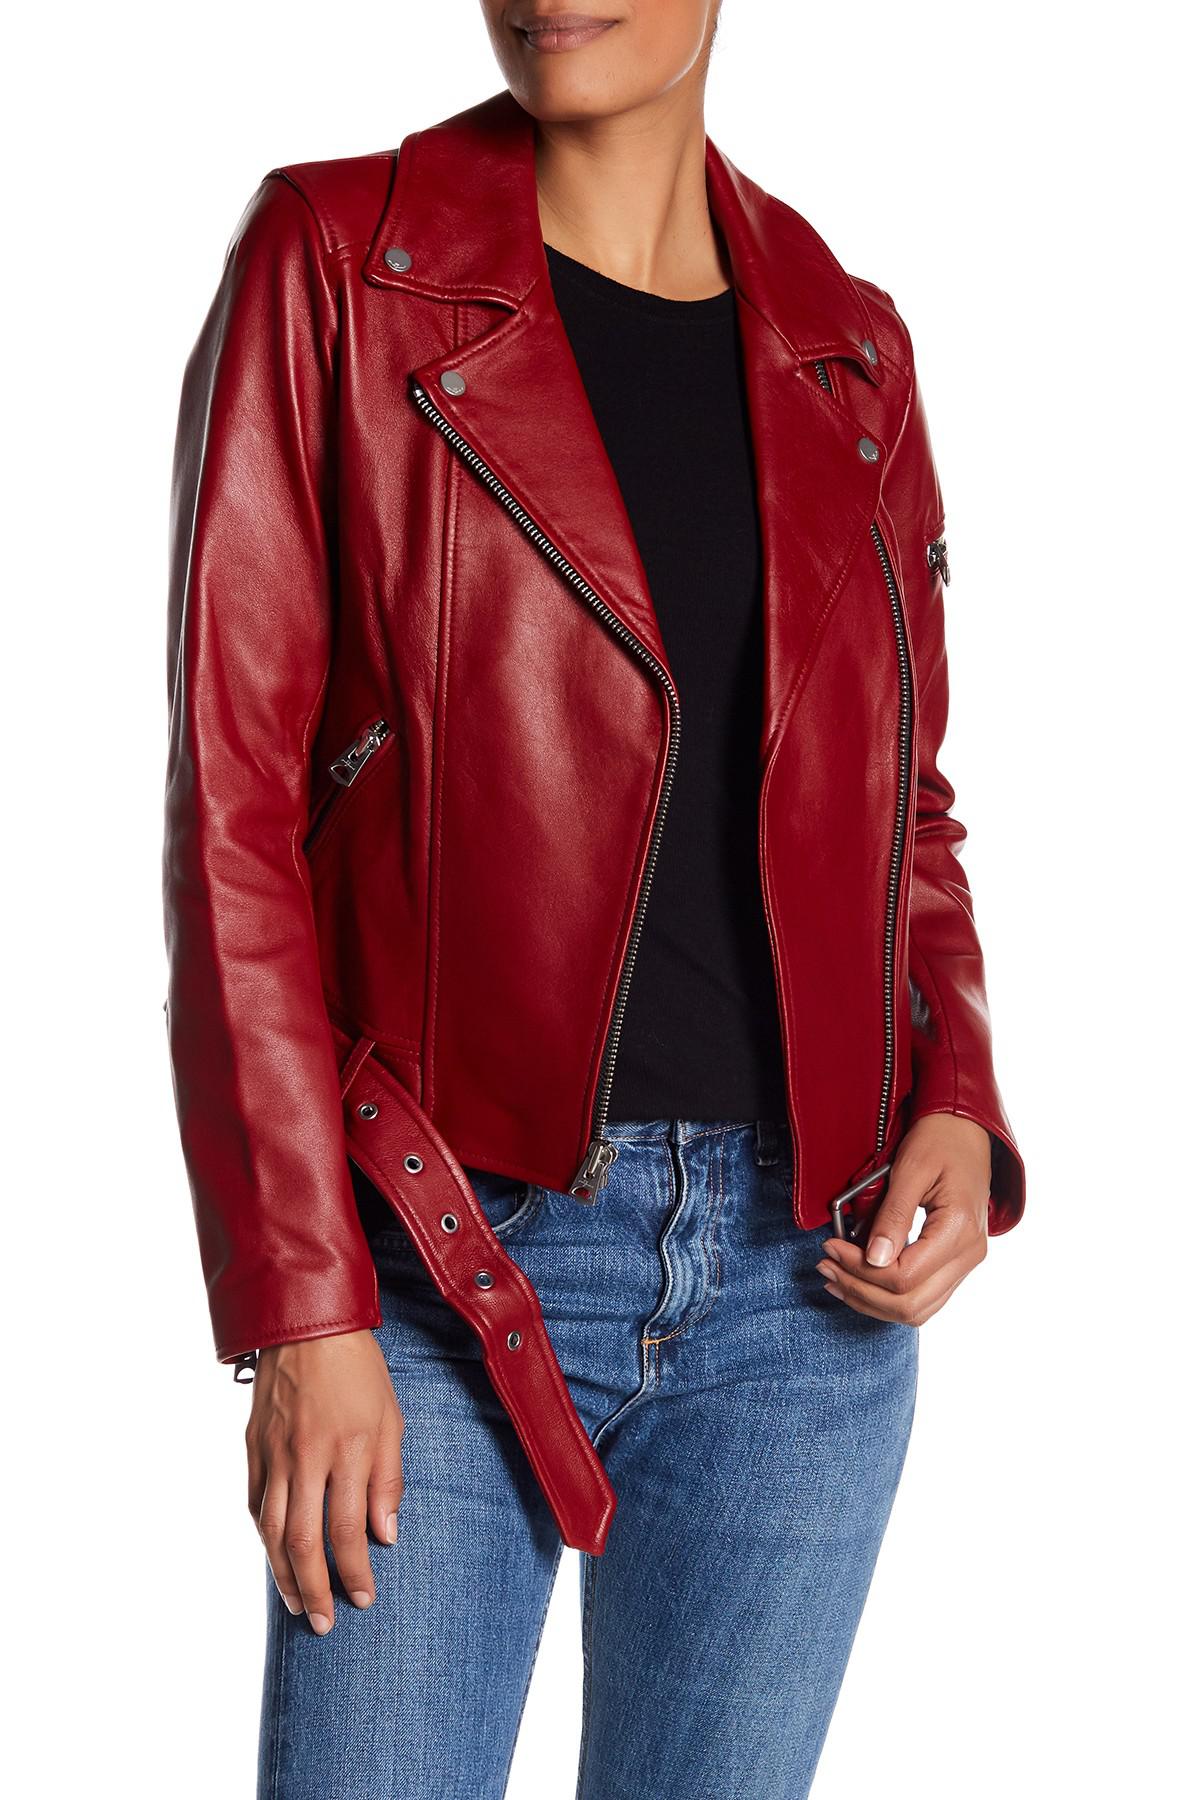 7 For All Mankind Asymmetrical Moto Faux Leather Zip Jacket in Red - Lyst